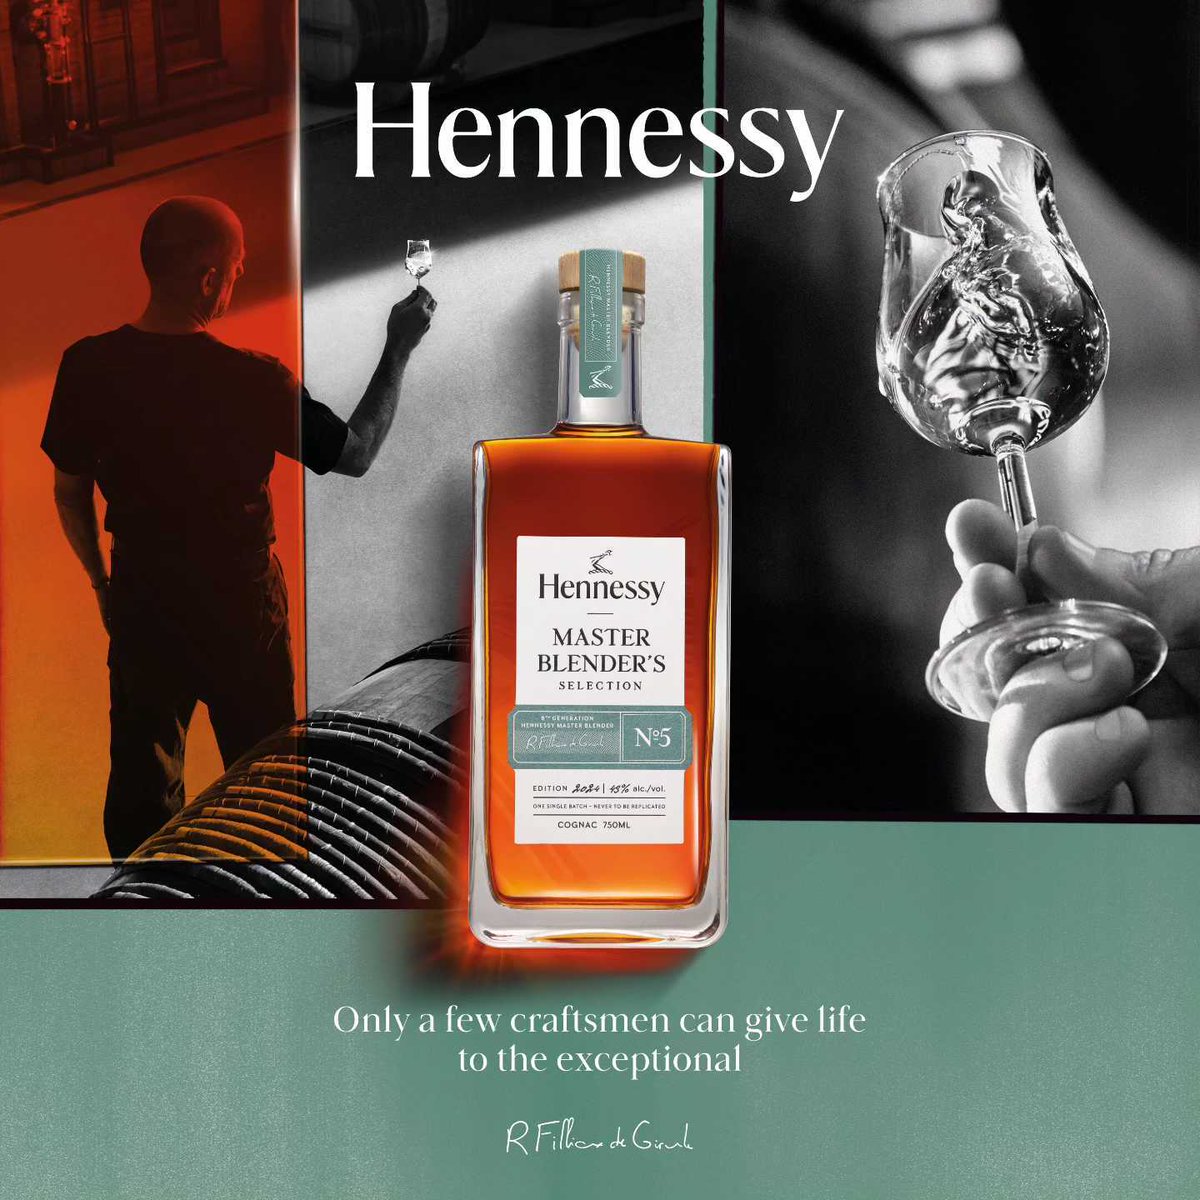 You’ve never tasted anything like this before. The limited 5th edition of Hennessy Master Blender’s, a rare personal blend by Renaud Fillioux de Gironde, is now available. It’s never to be duplicated, so make sure you grab yours online or in-store while supplies last.…